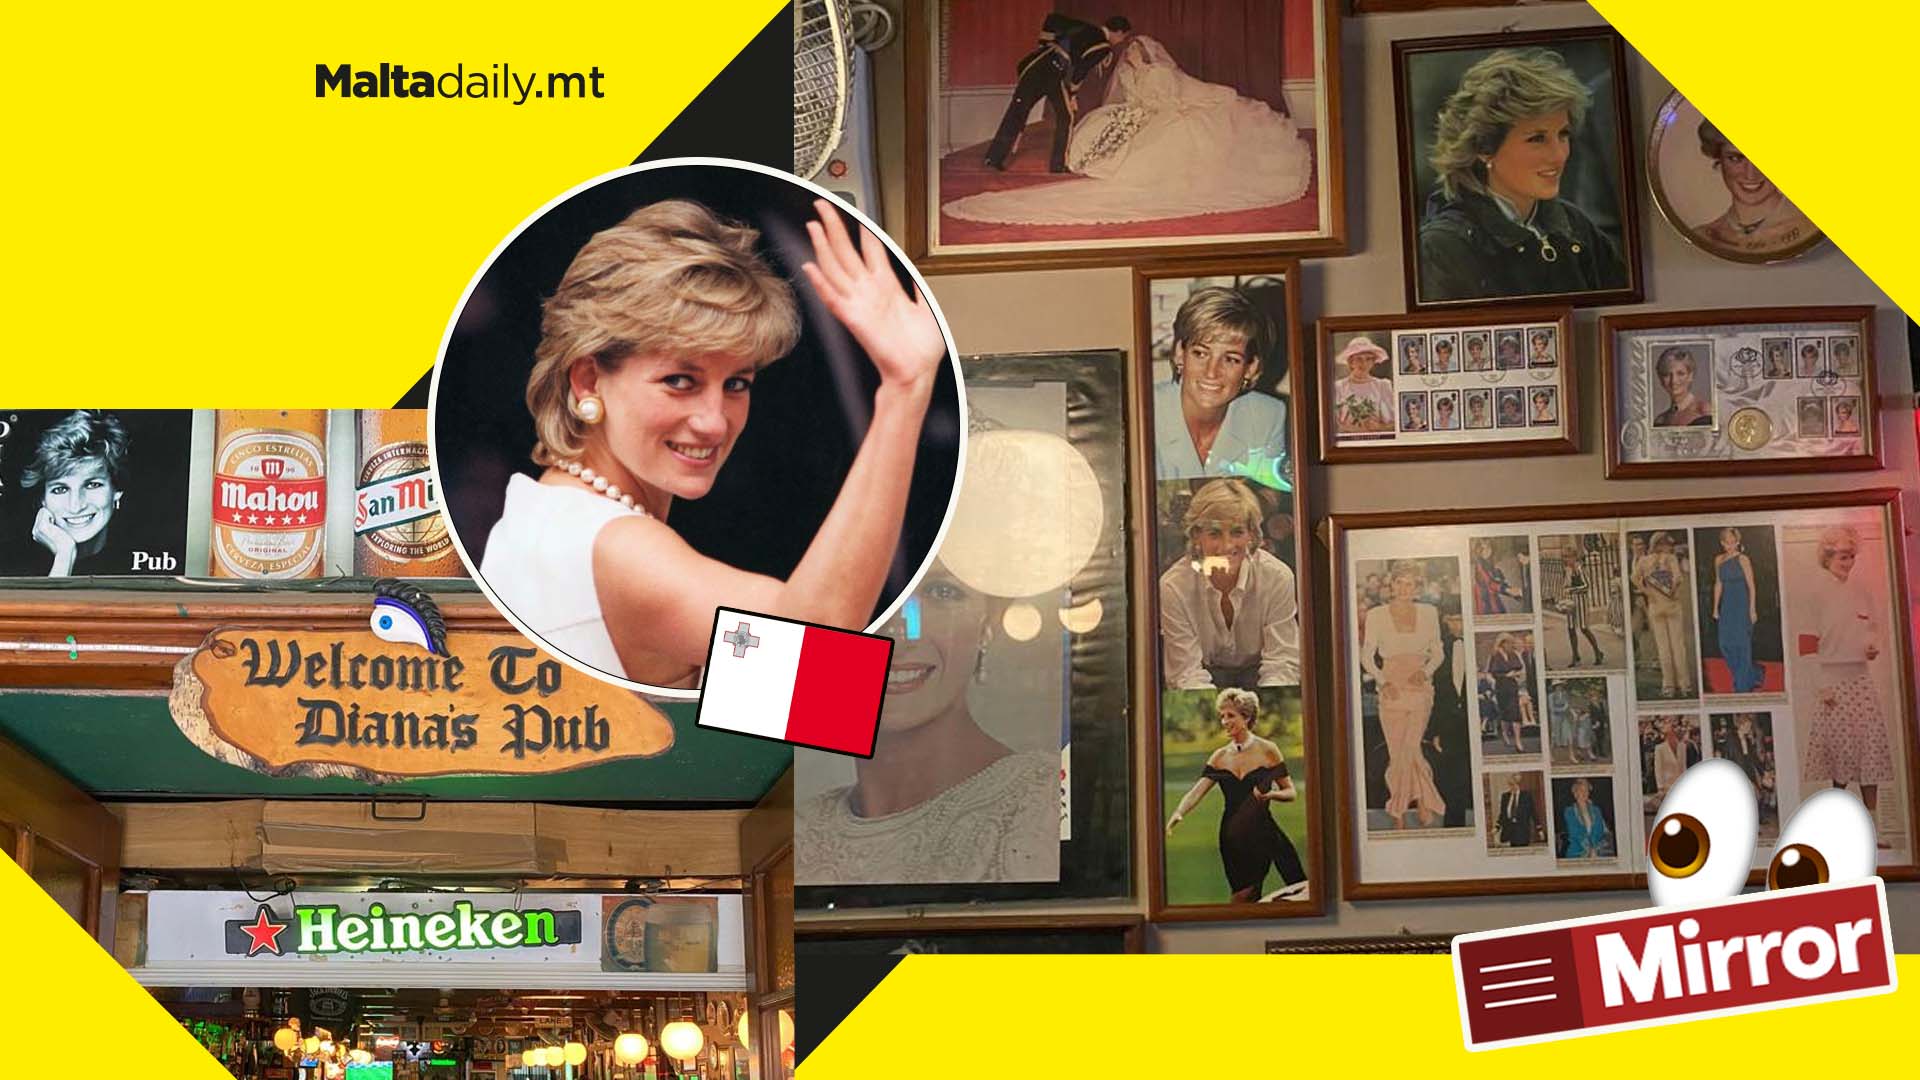 25 years since Princess Diana’s passing: The Maltese pub in her memory